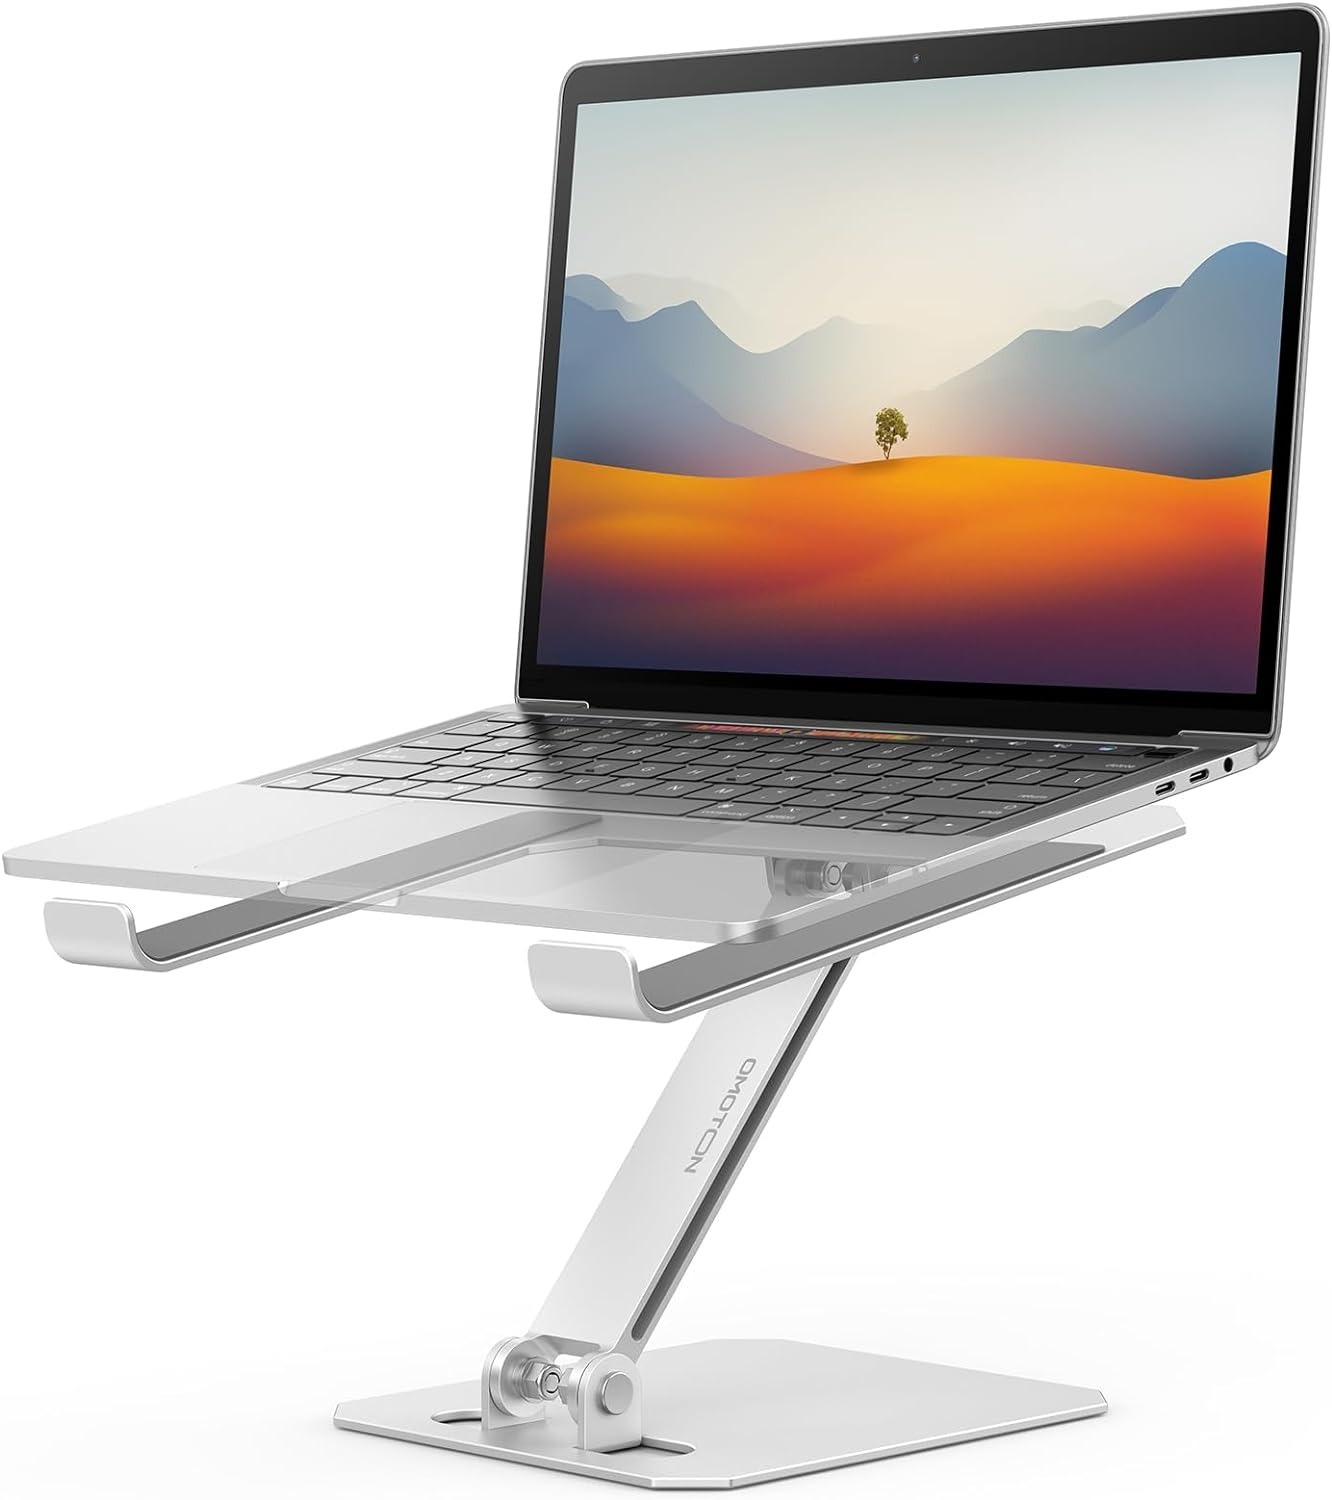 OMOTON Laptop Stand for Desk, Ergonomic Adjustable Computer Stand Aluminum $9.94 + Free Shipping w/ Prime or $35+